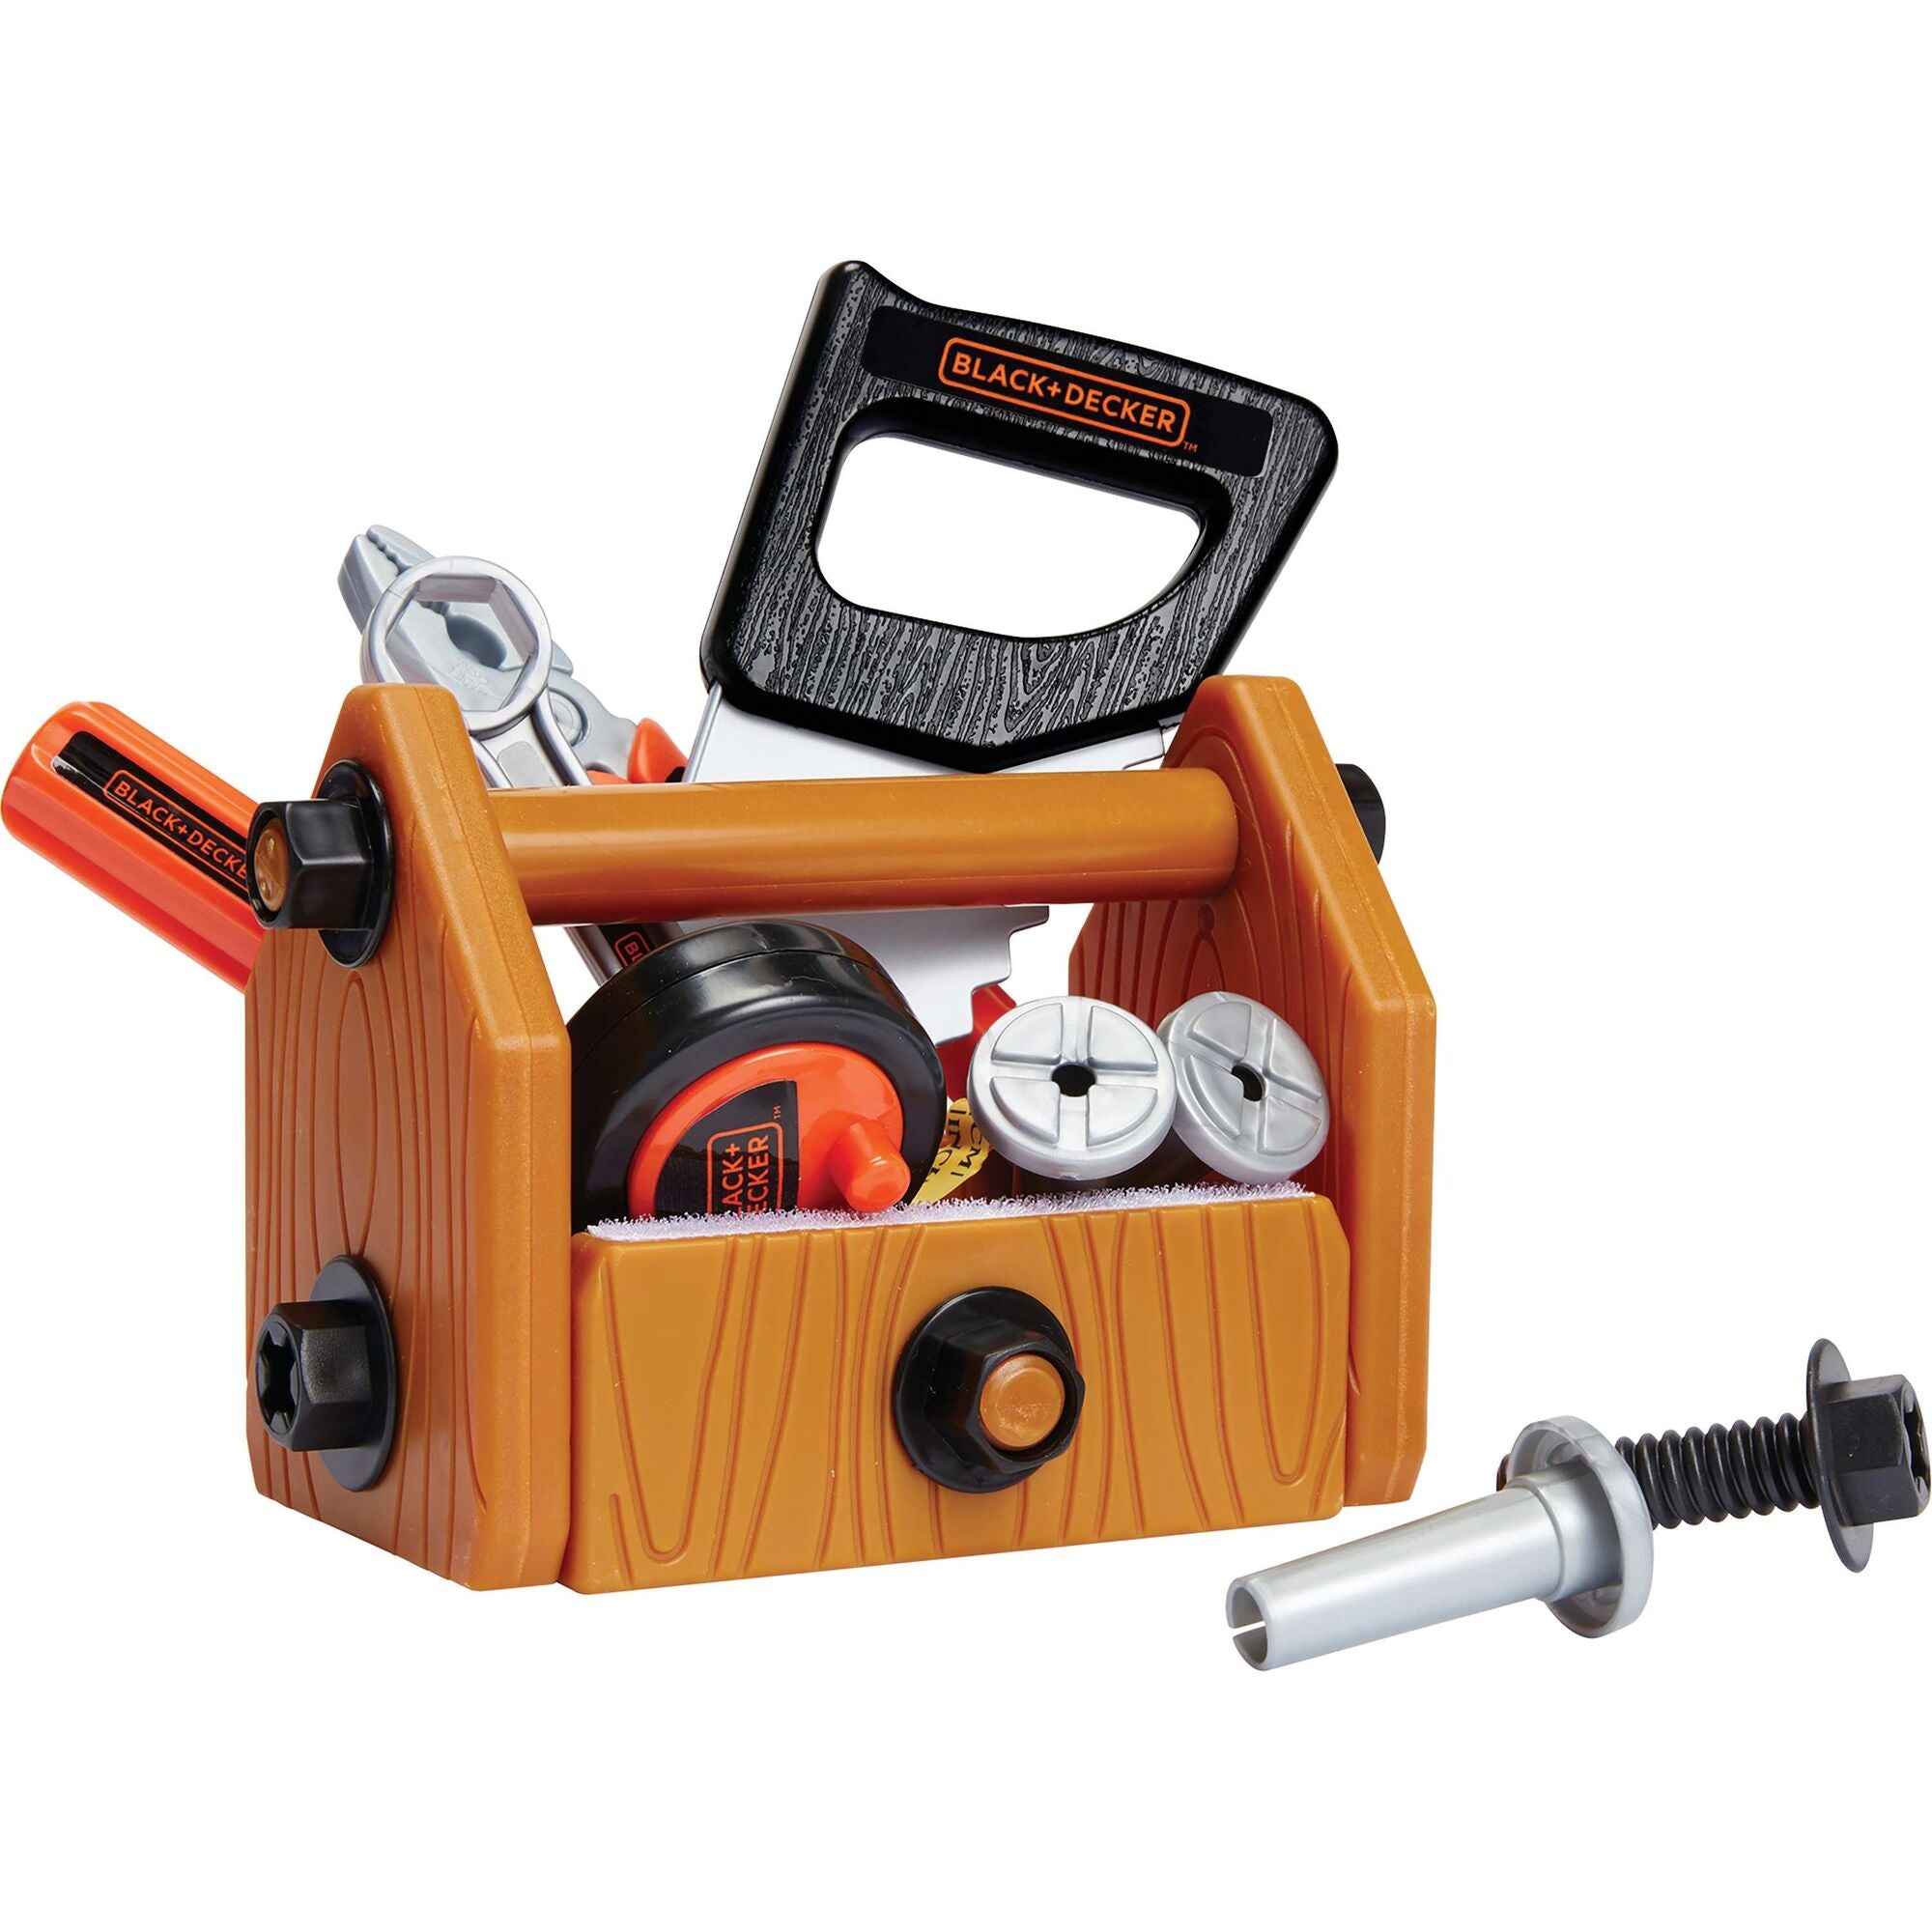 Deluxe Tool Set W/ Toolbox